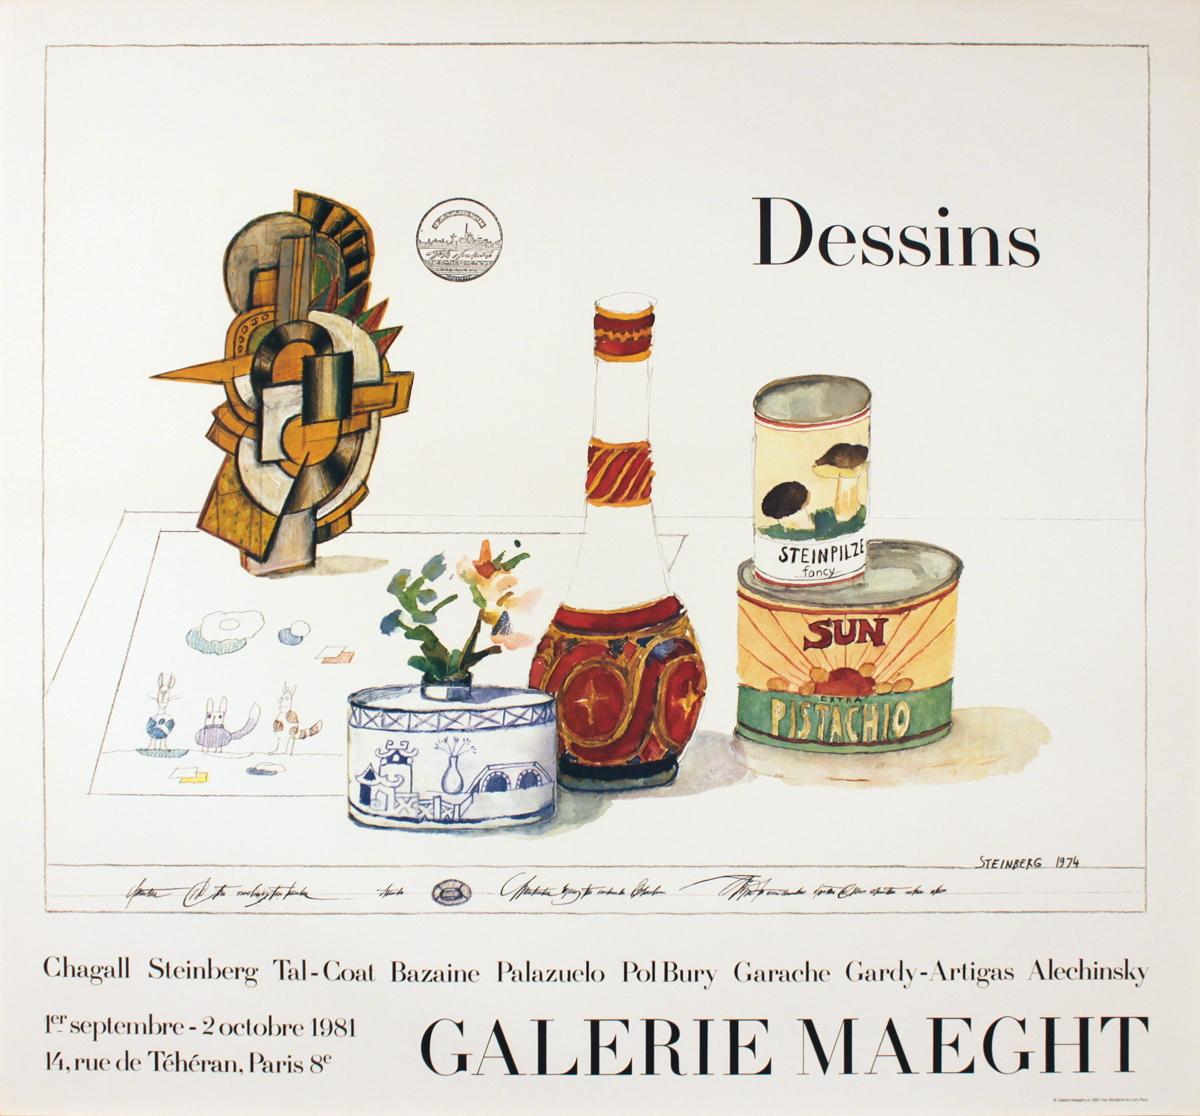 First printing exhibition poster by Saul Steinberg titled Dessins (Drawings) from a show held in 1981 at Galerie Maeght in Paris. 
